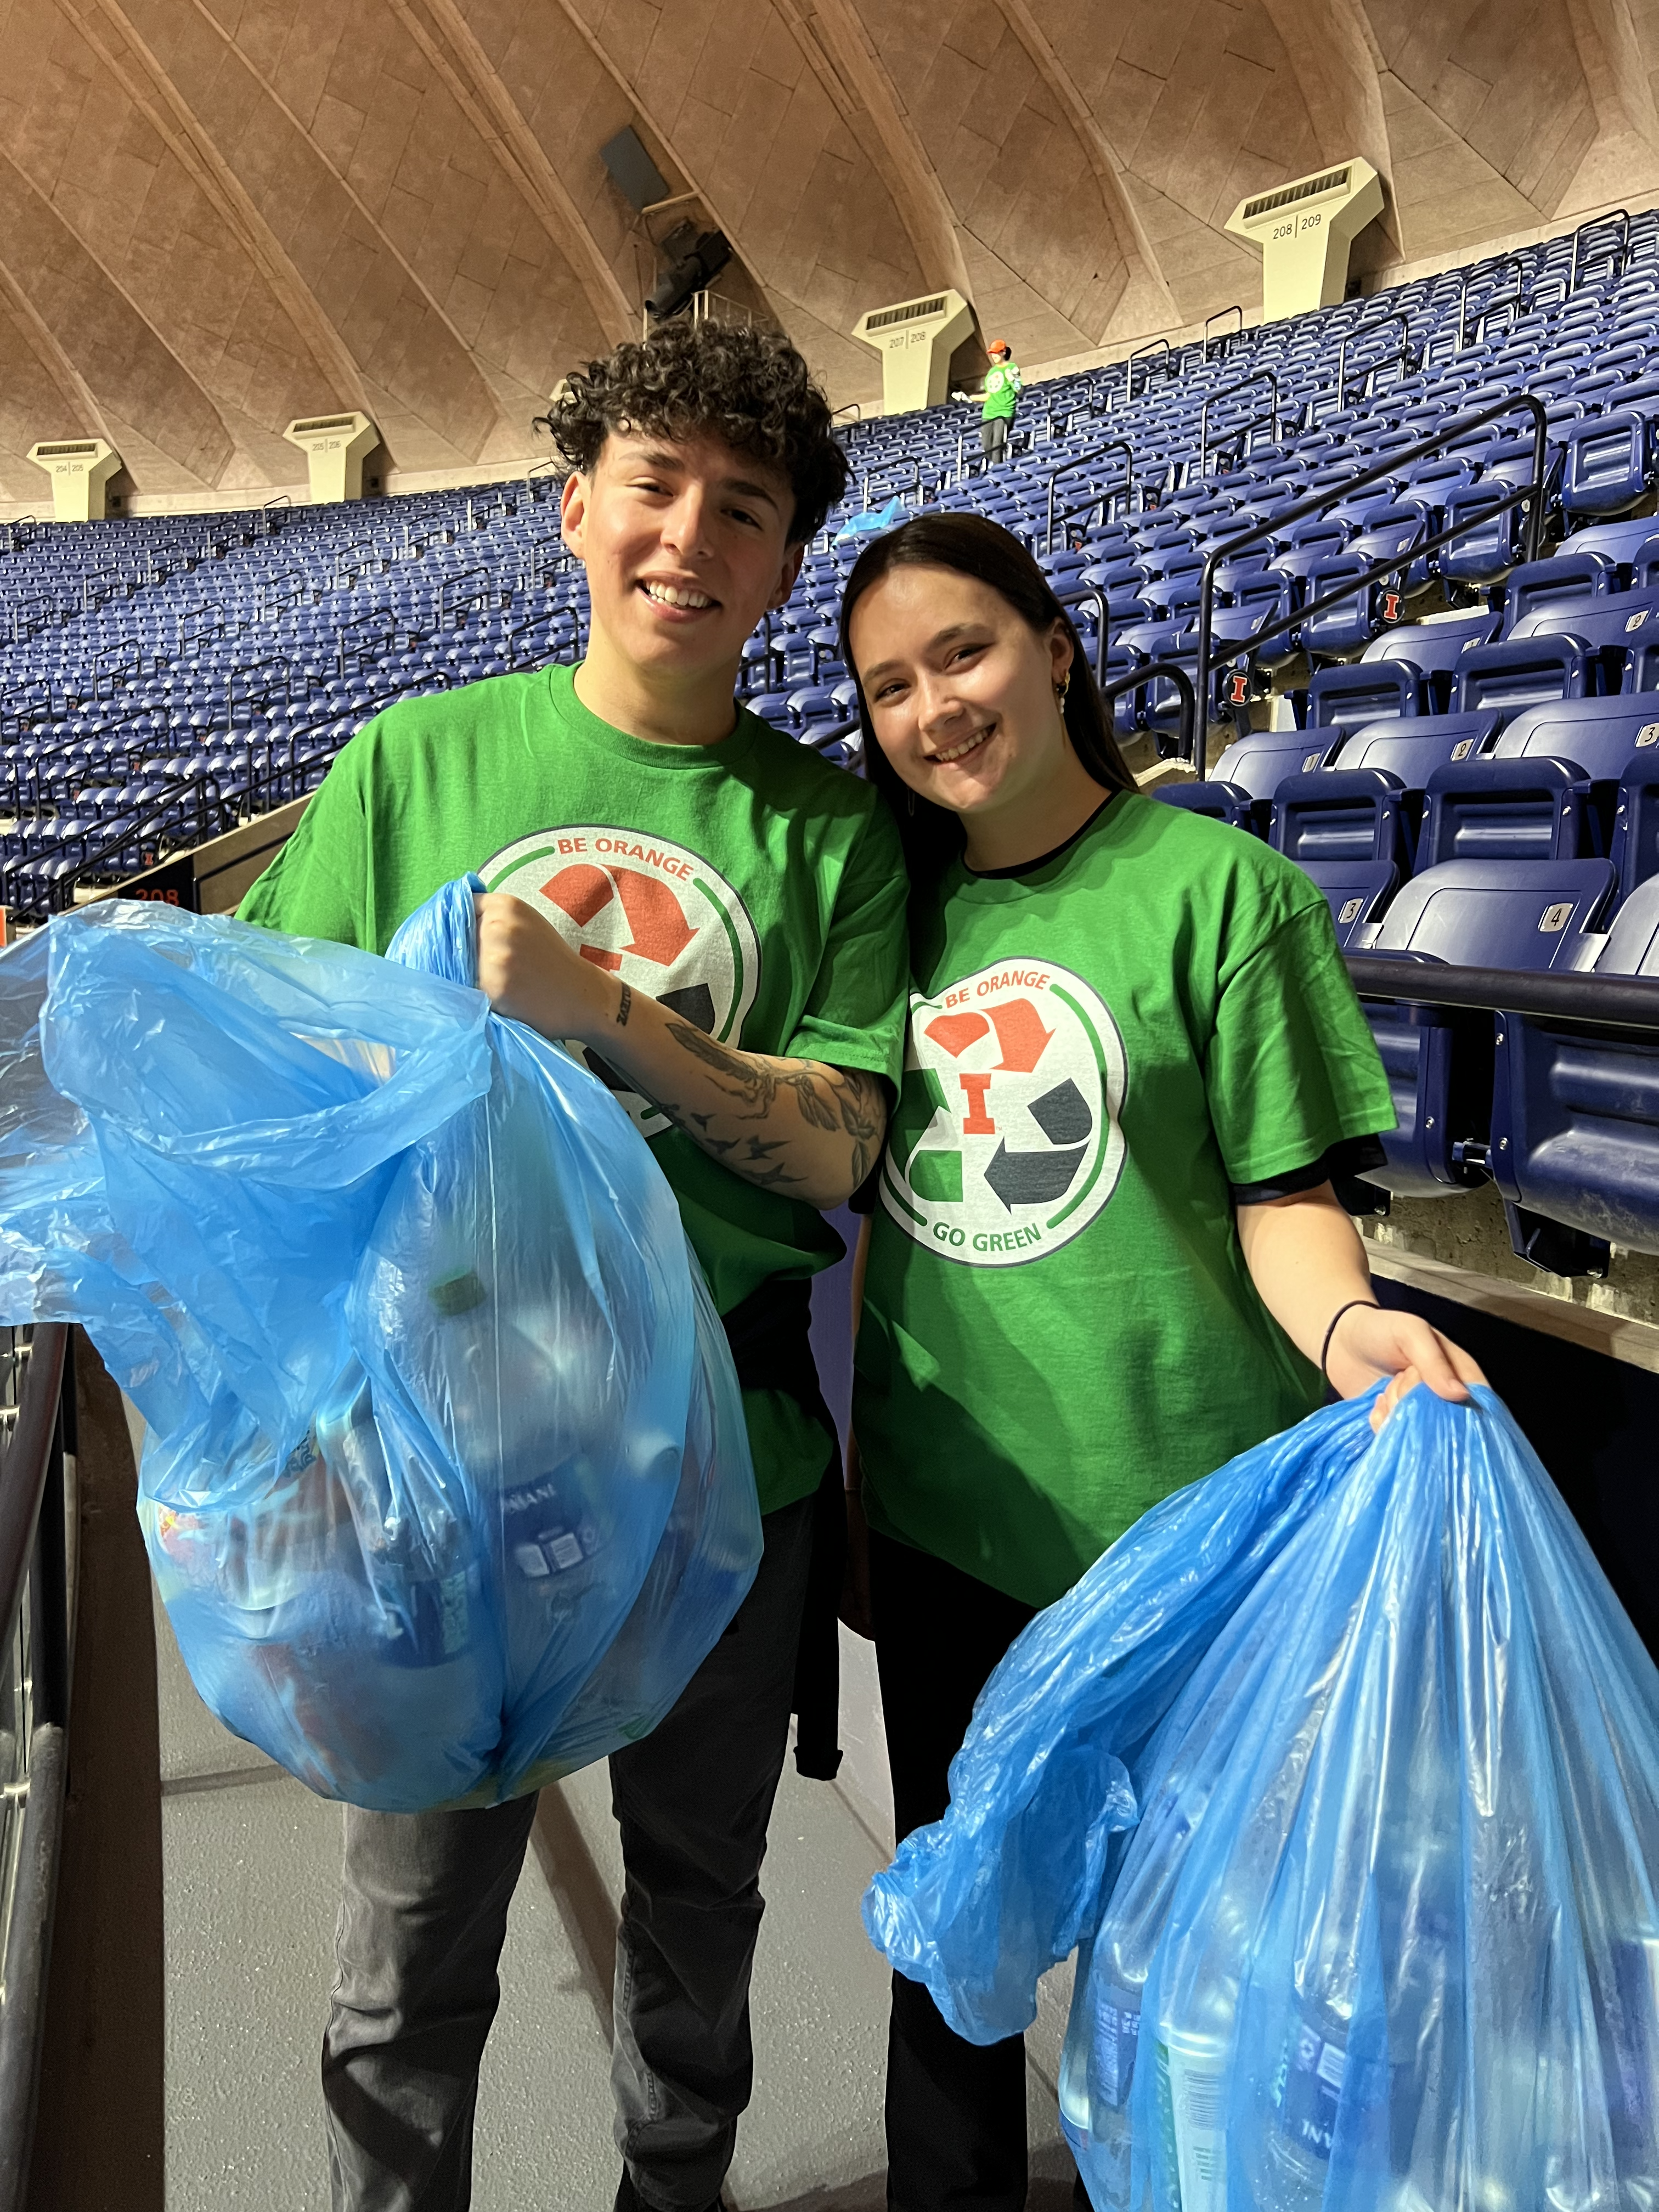 Two F&S volunteer's holding bags of recycling in the stadium.